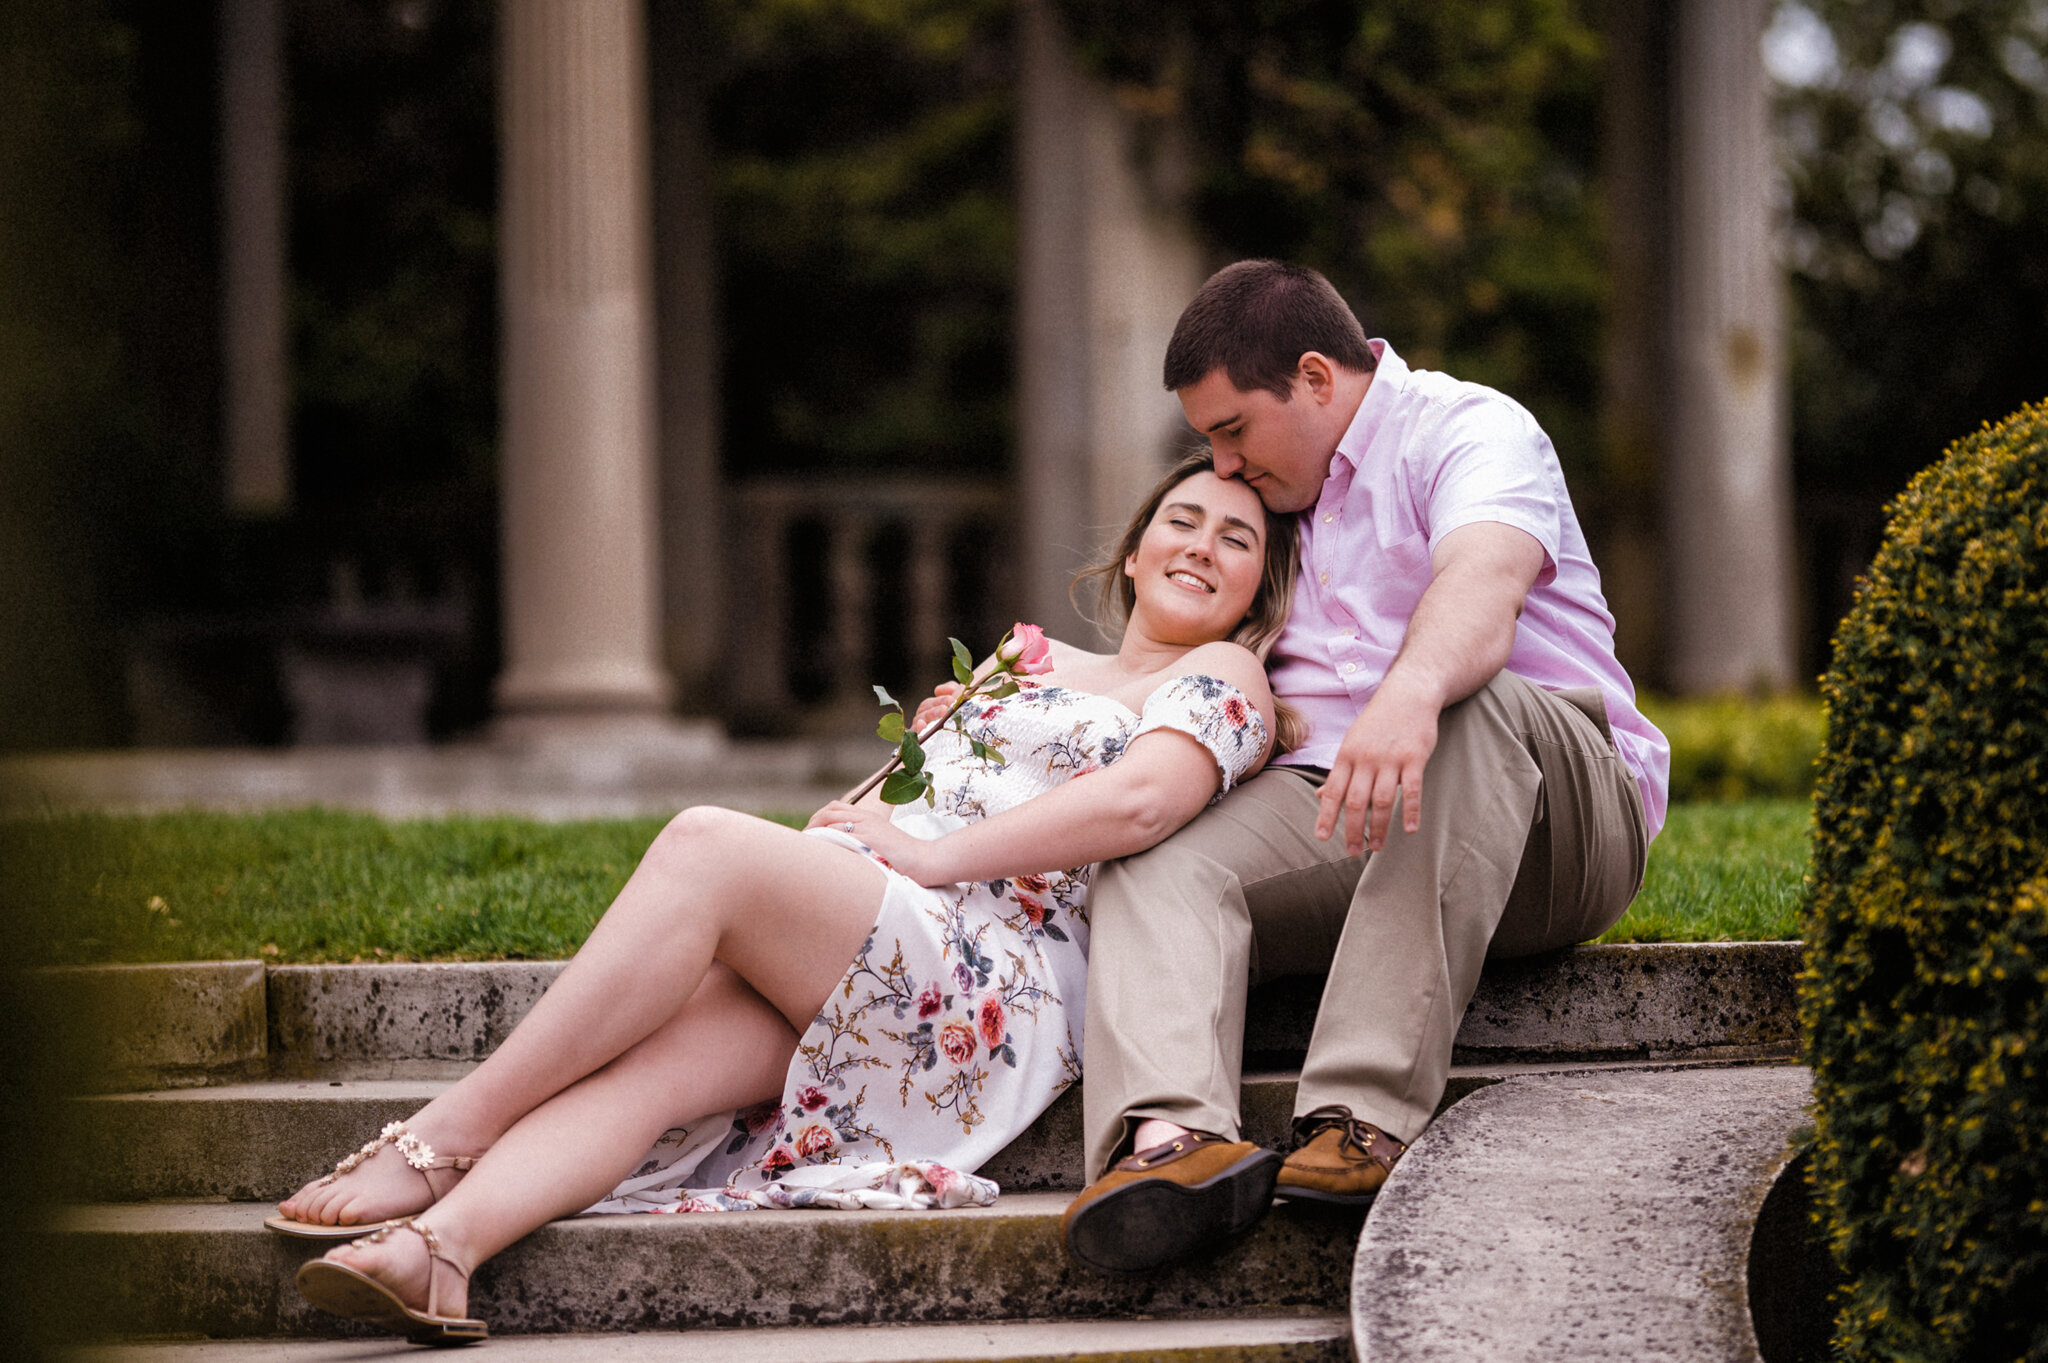 Beauty_and_Life_Captured_Taylor_and_Drew_Engagement-101.jpg